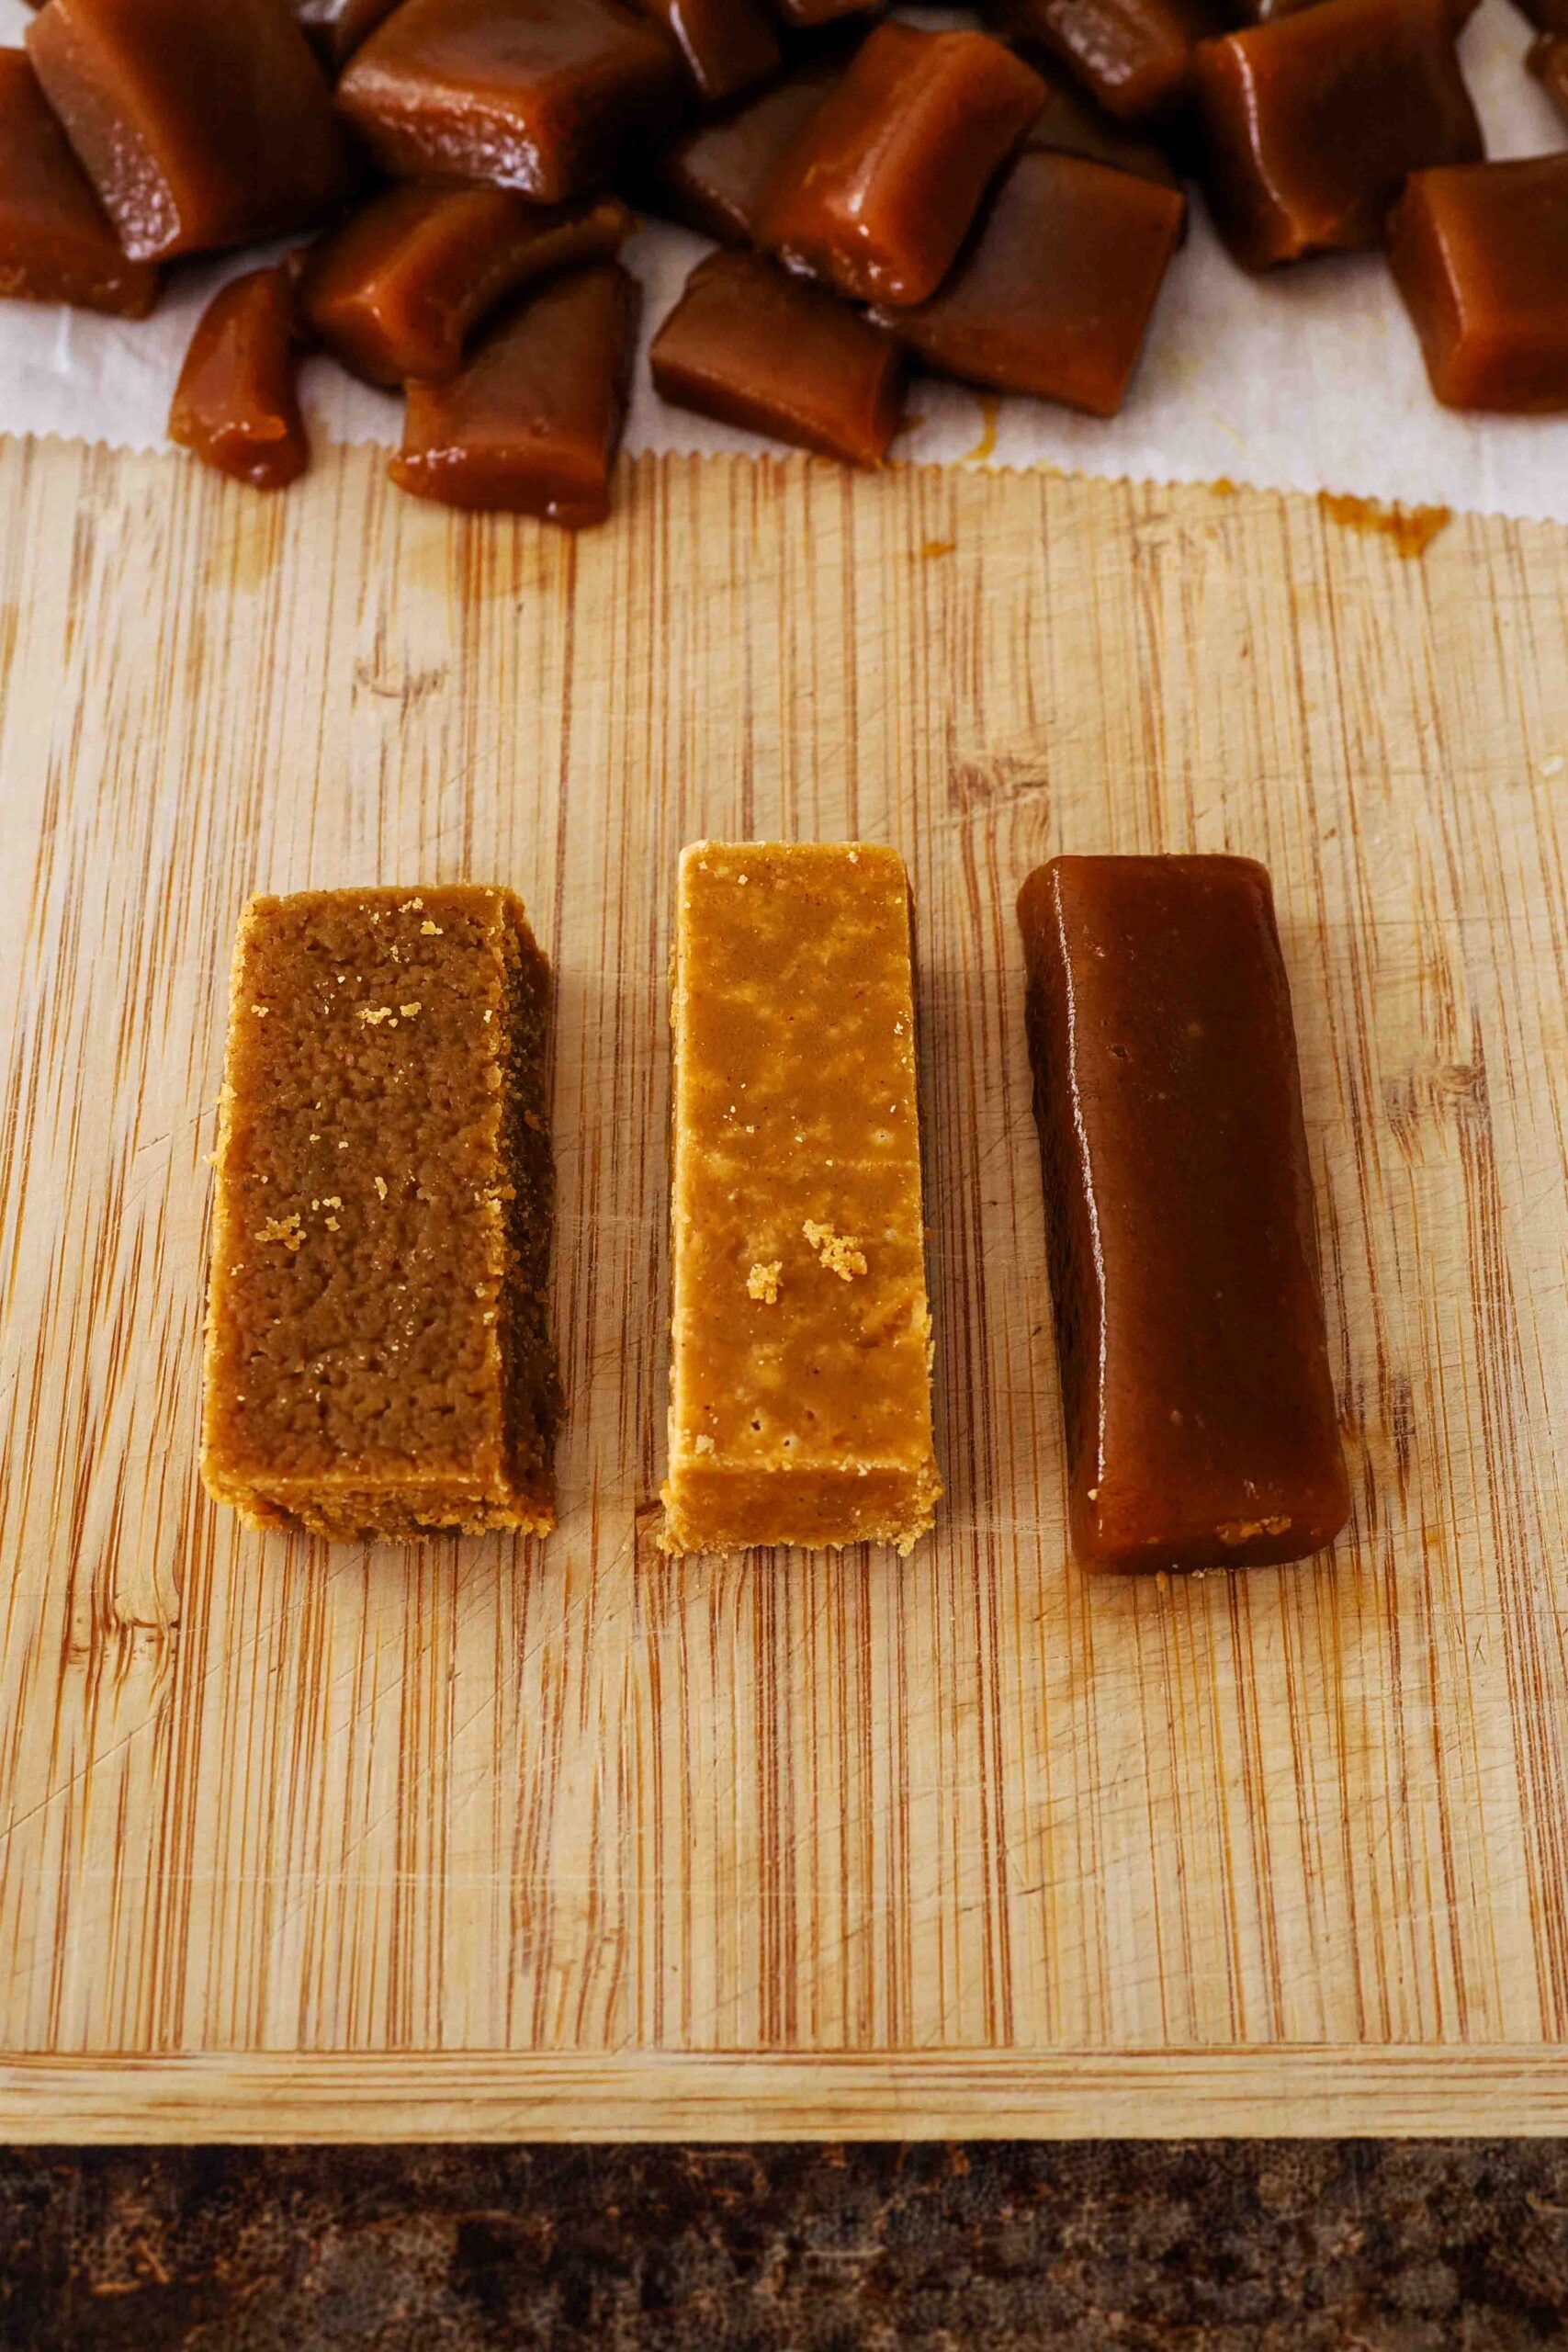 Three caramels on a cutting board: The two leftmost caramels are grainy and crystallized, and the caramel on the right is dark and shiny.